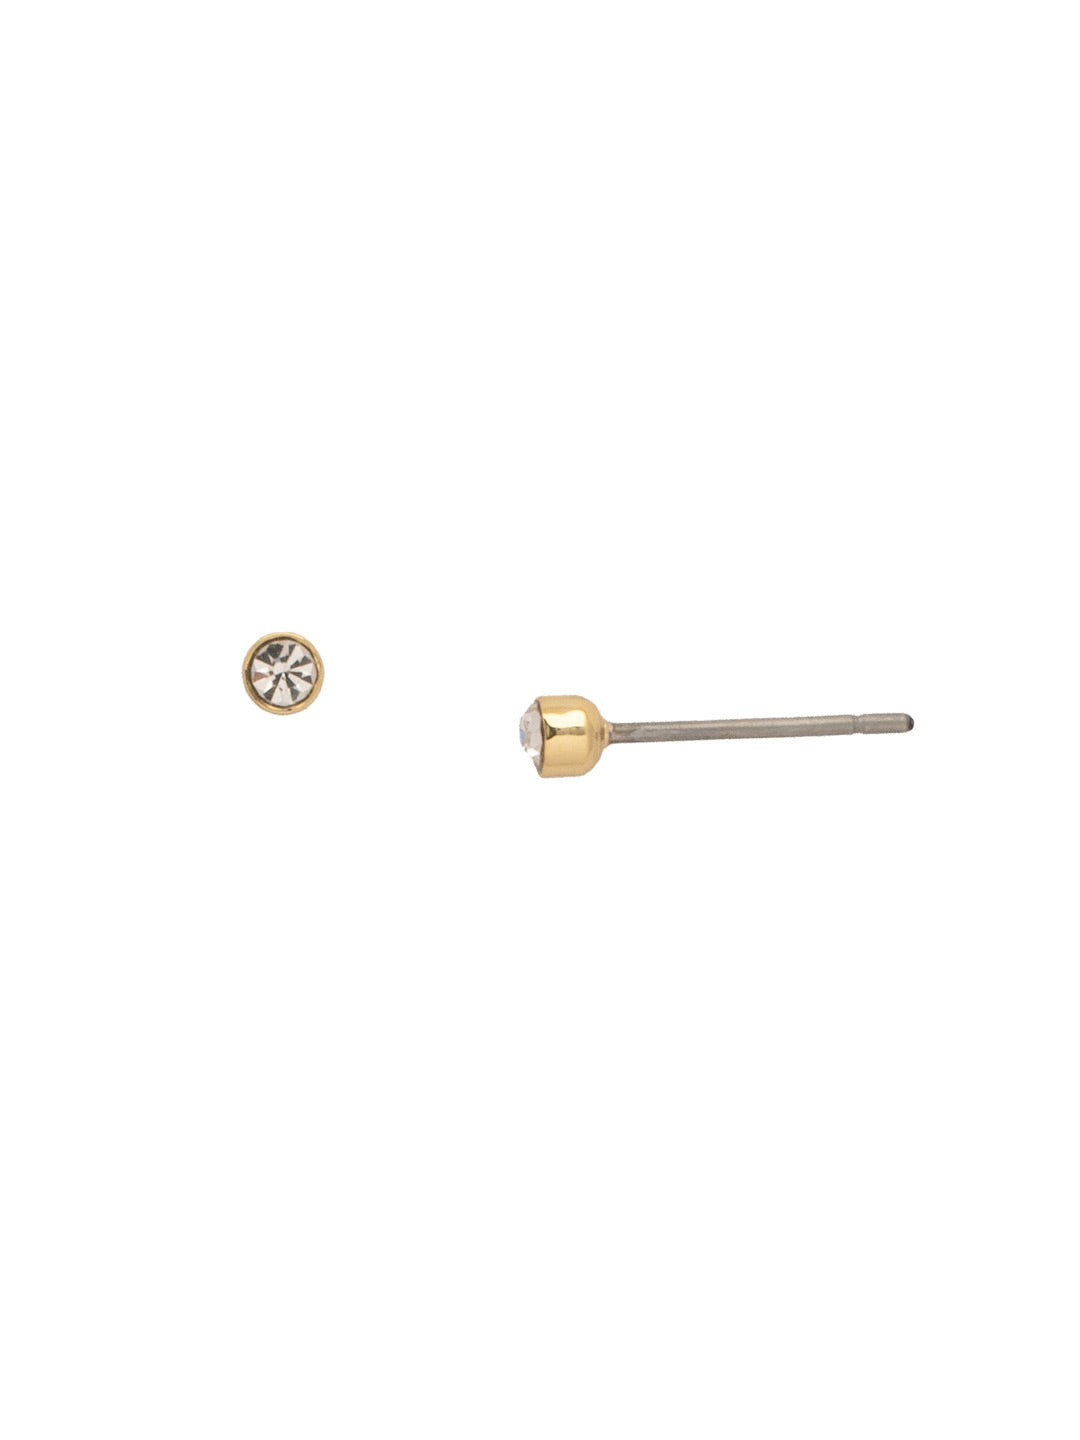 Dot Stud Earrings - EFM56BGCRY - <p>The Dot Stud Earrings feature tiny round cut crystals on a post, perfect to wear alone for a touch of sparkle, or layer in your second ear piercing with your favorite hoops! From Sorrelli's Crystal collection in our Bright Gold-tone finish.</p>